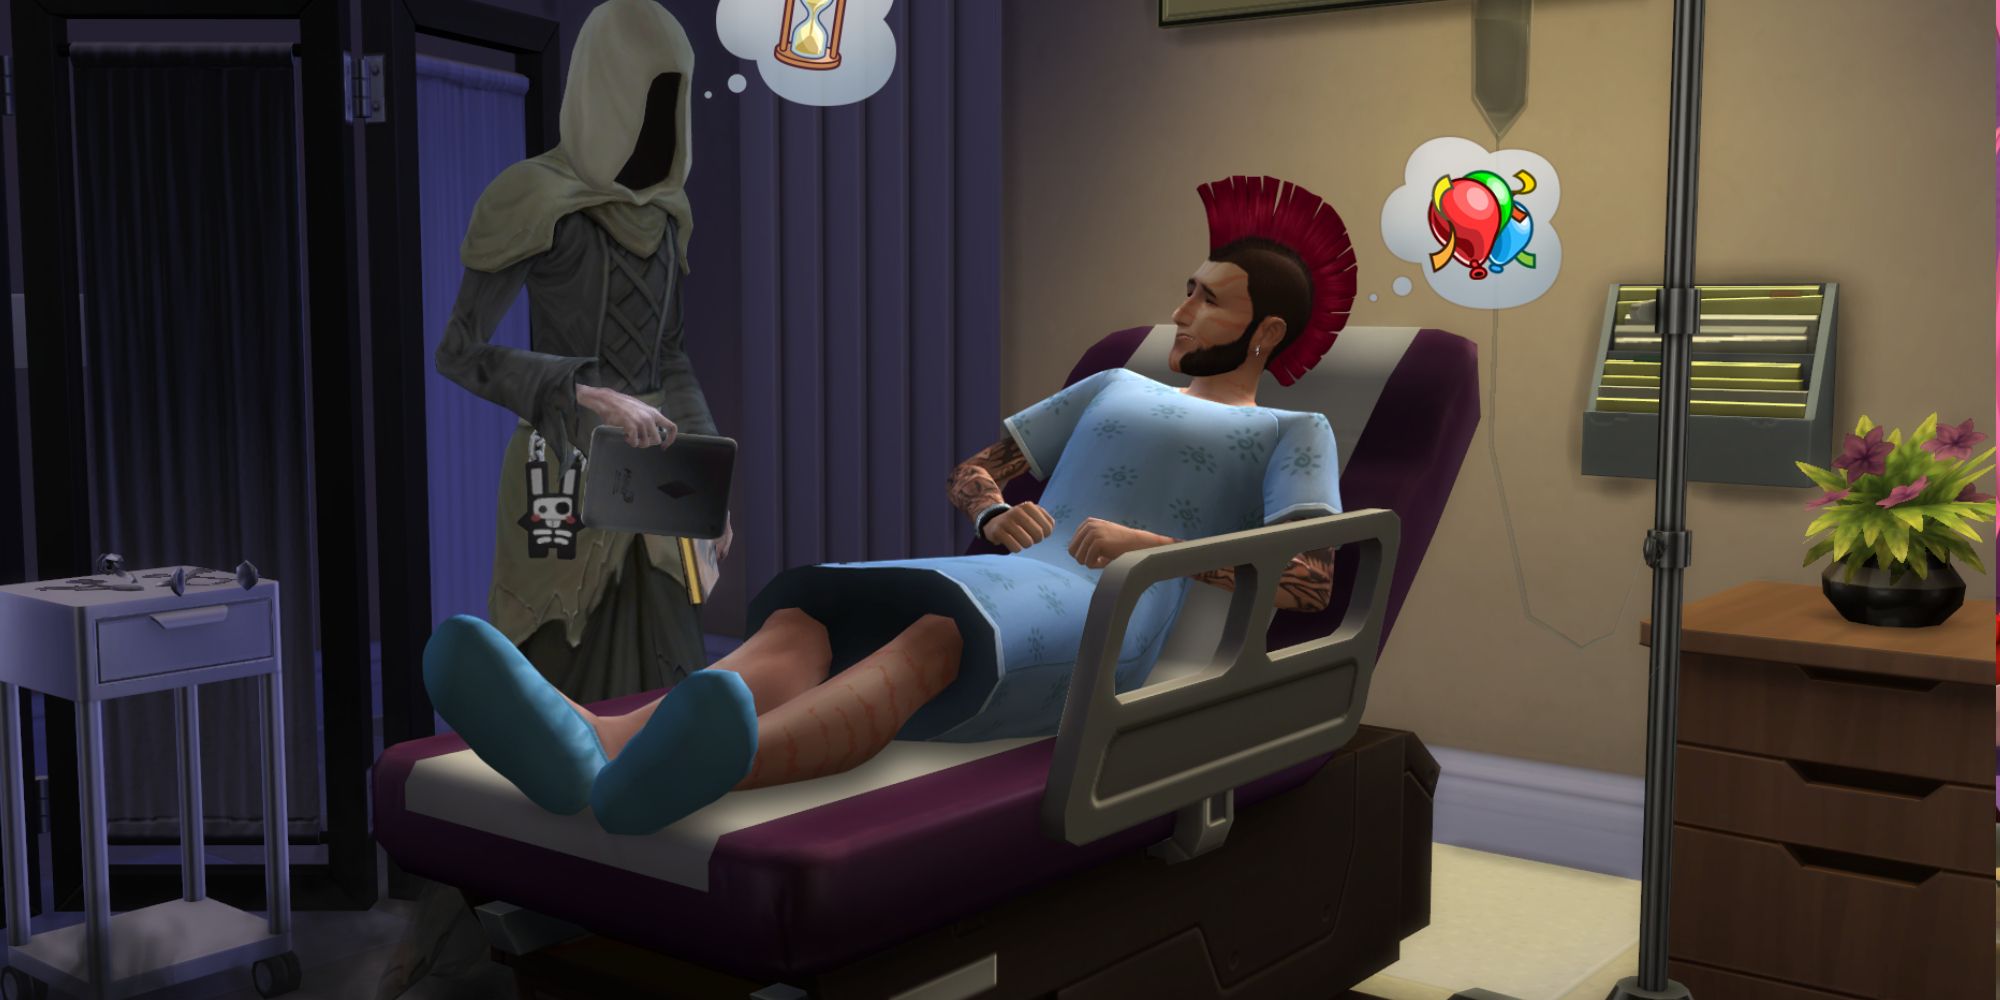 SIms 4 grim in hospital with a sim